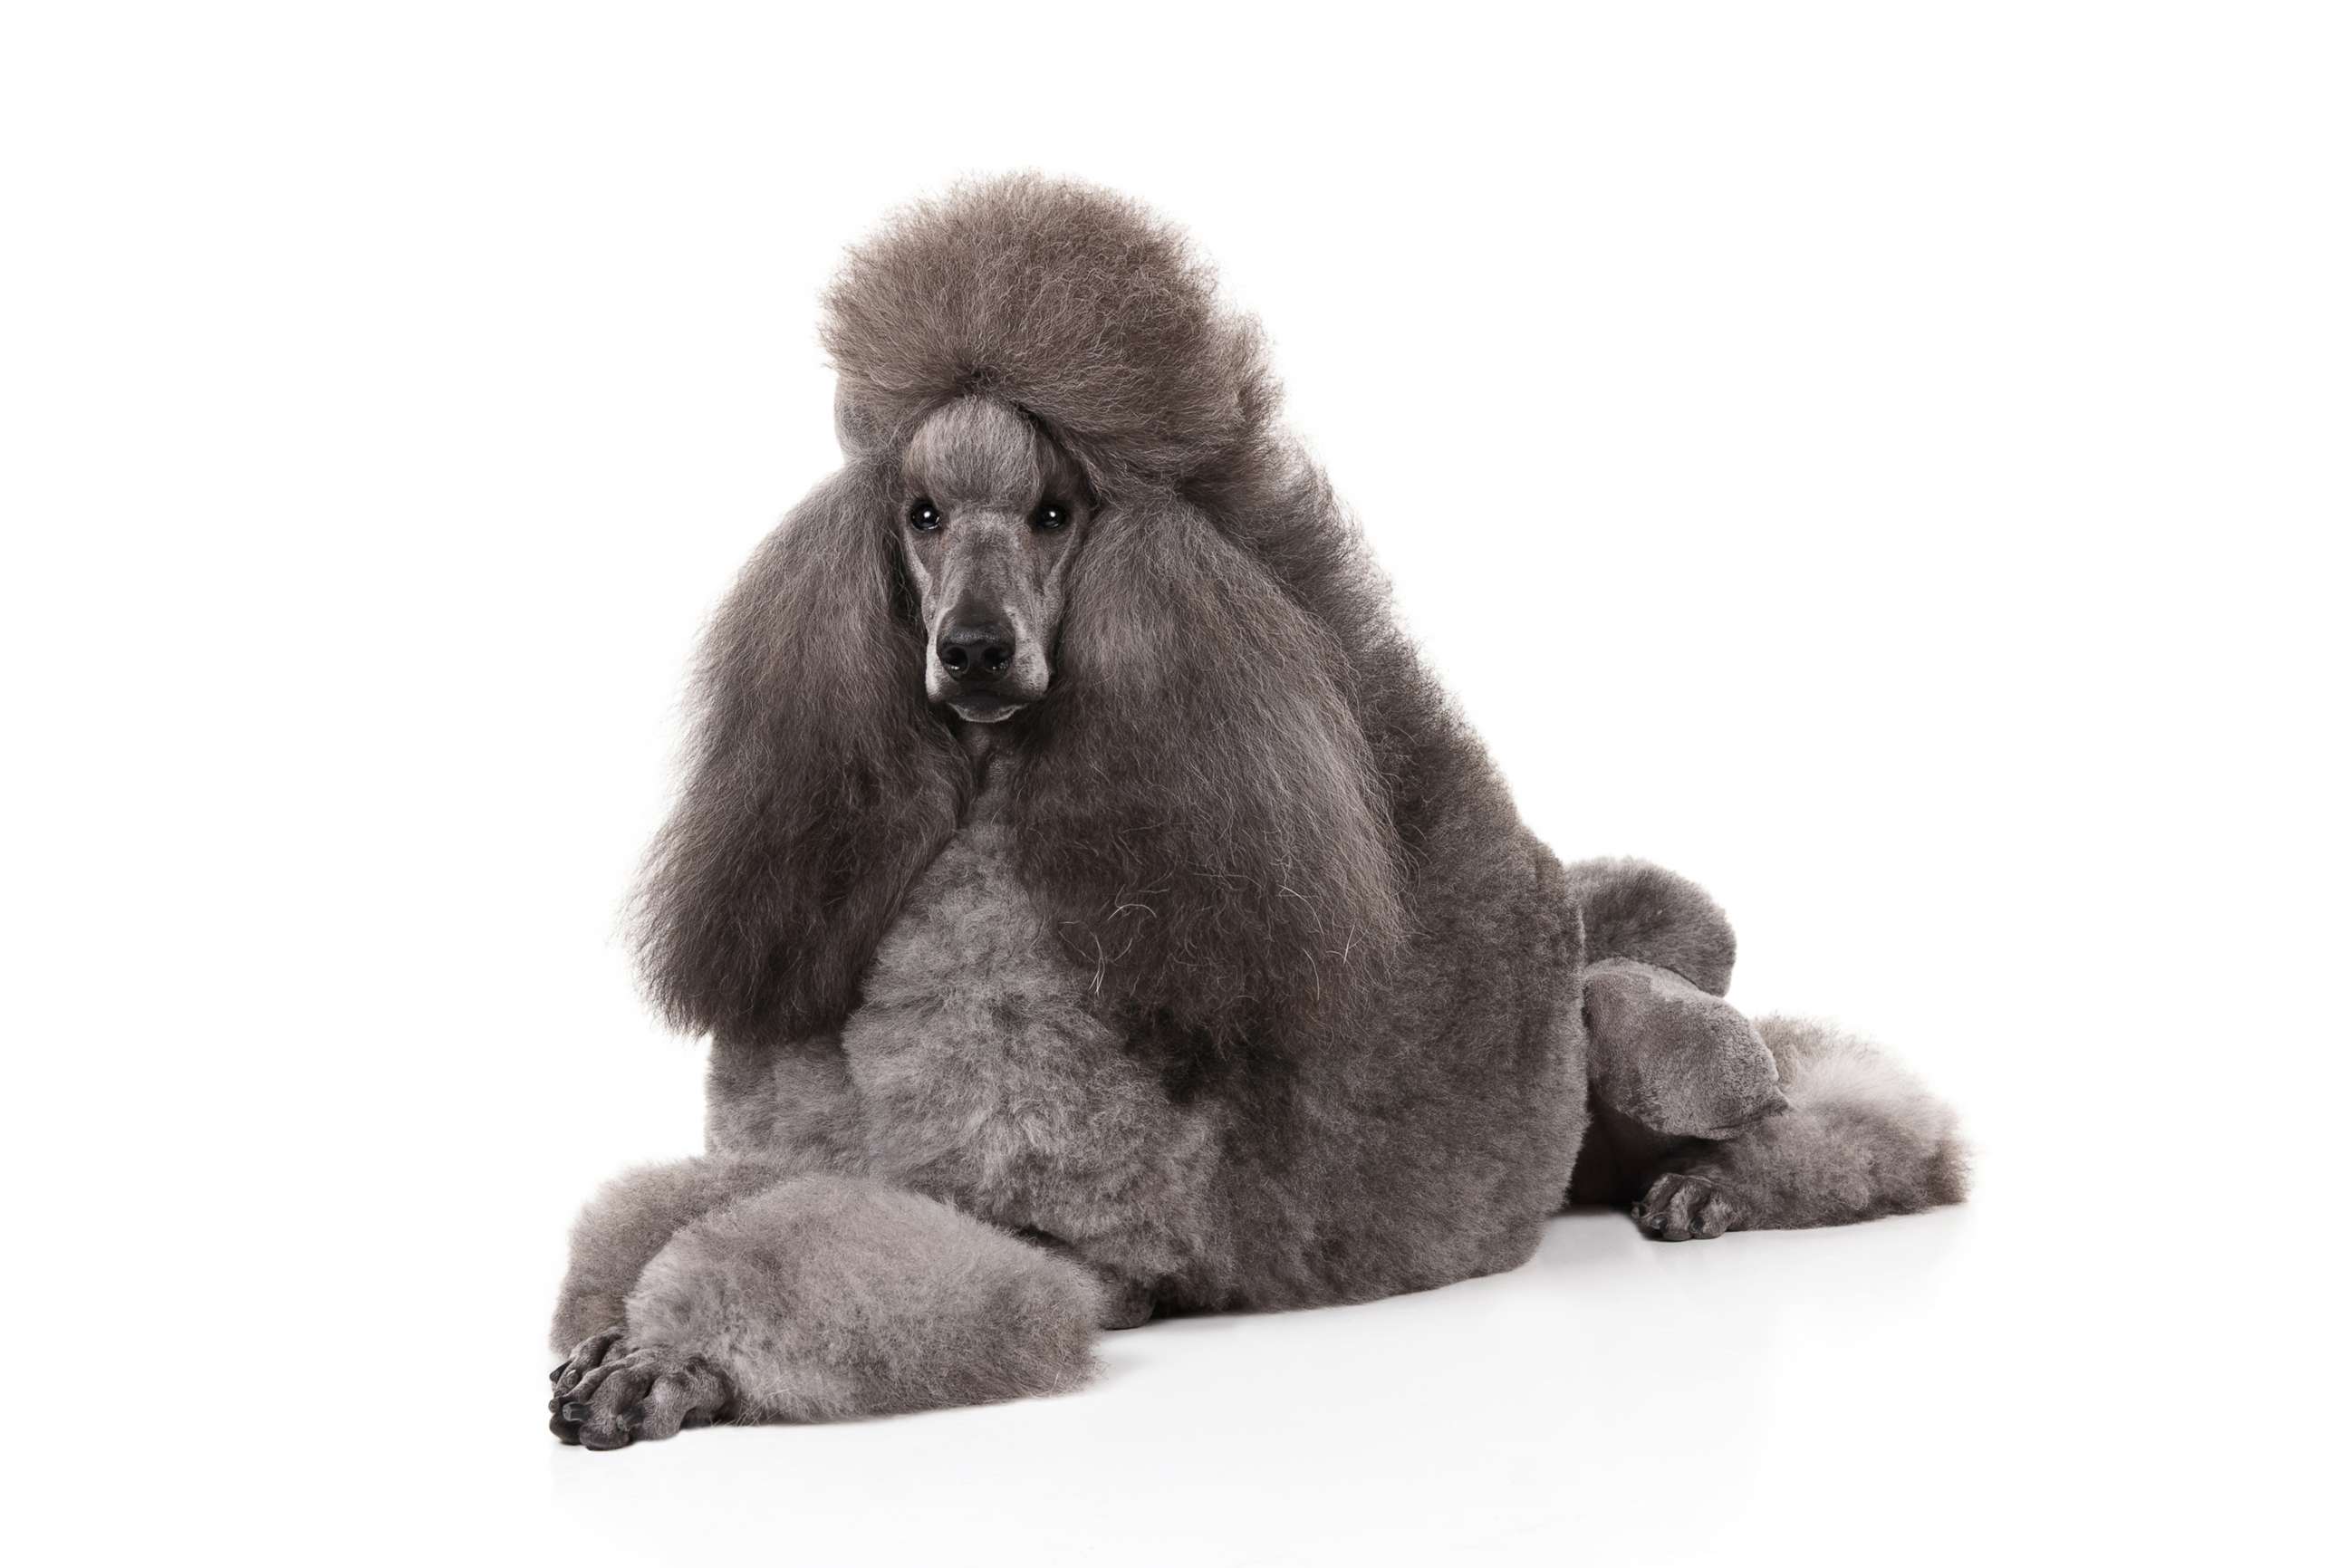 PHOTO: Poodles are No. 7 on the AKC's most popular dog breeds of 2018.